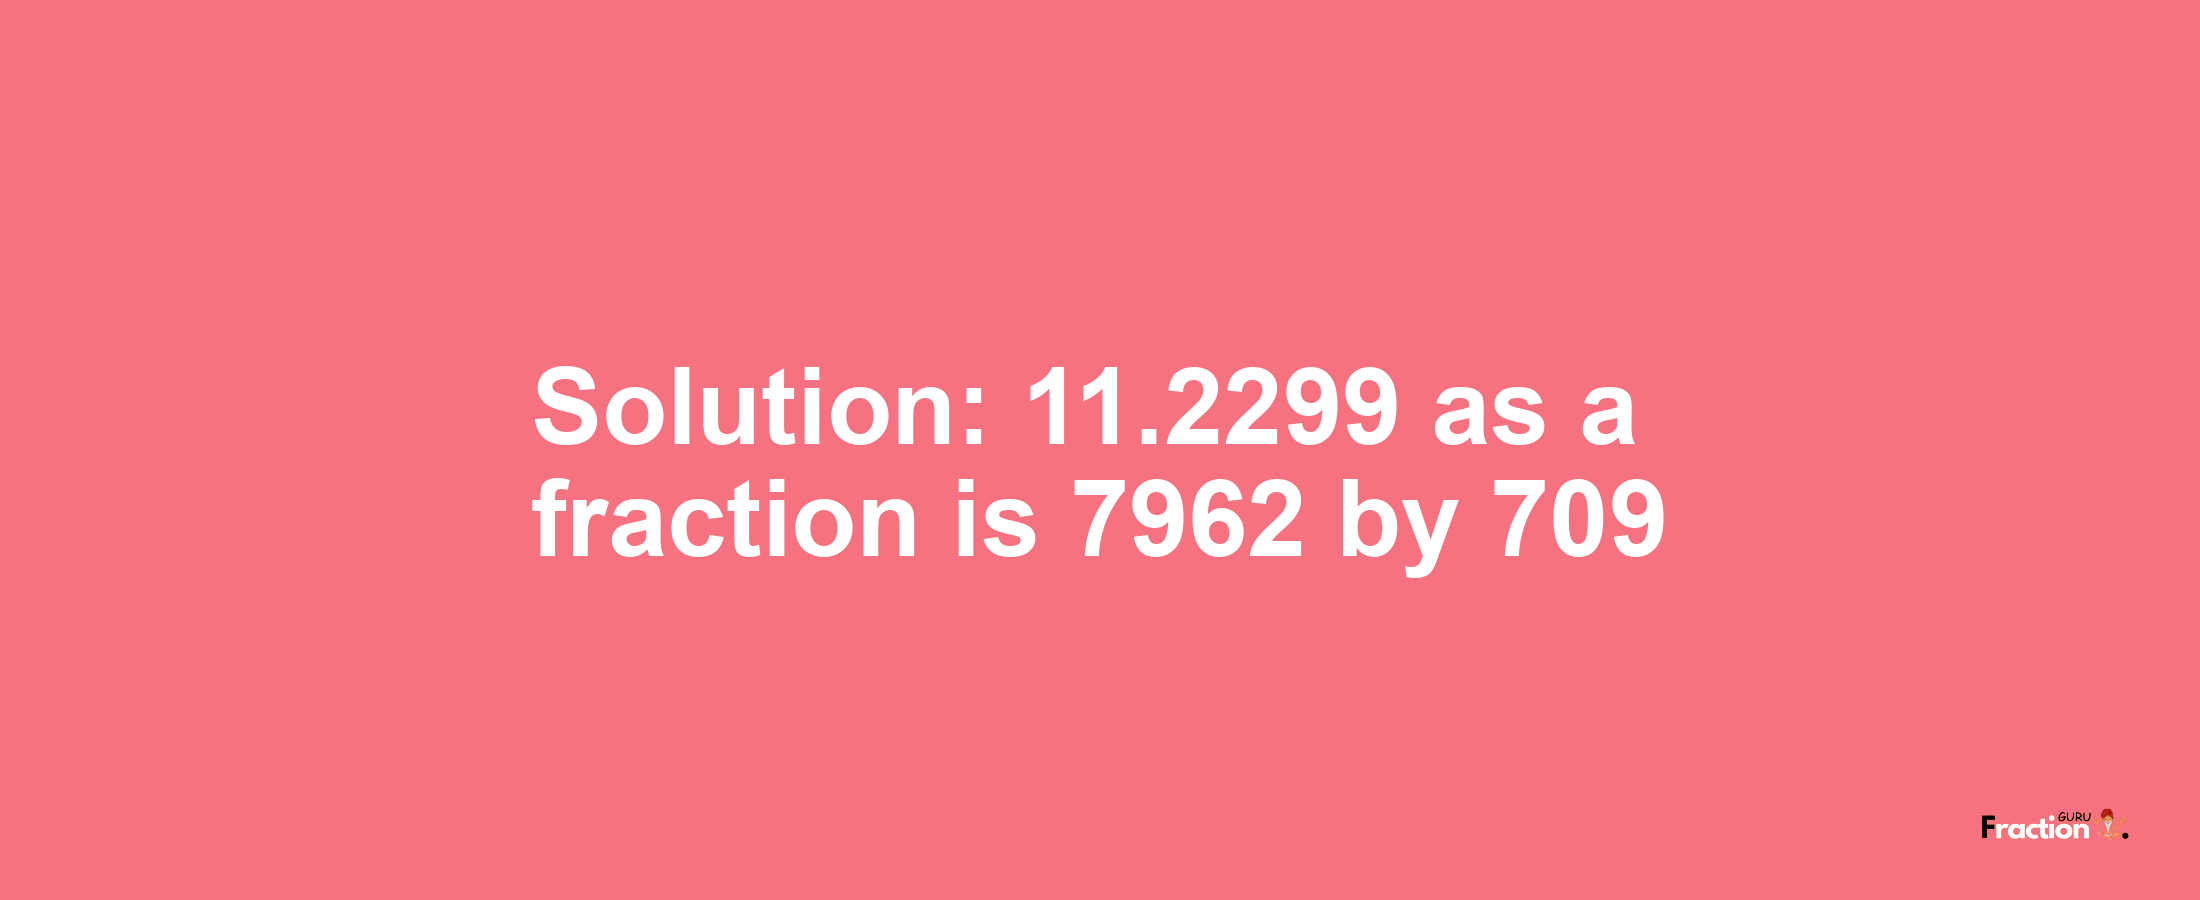 Solution:11.2299 as a fraction is 7962/709